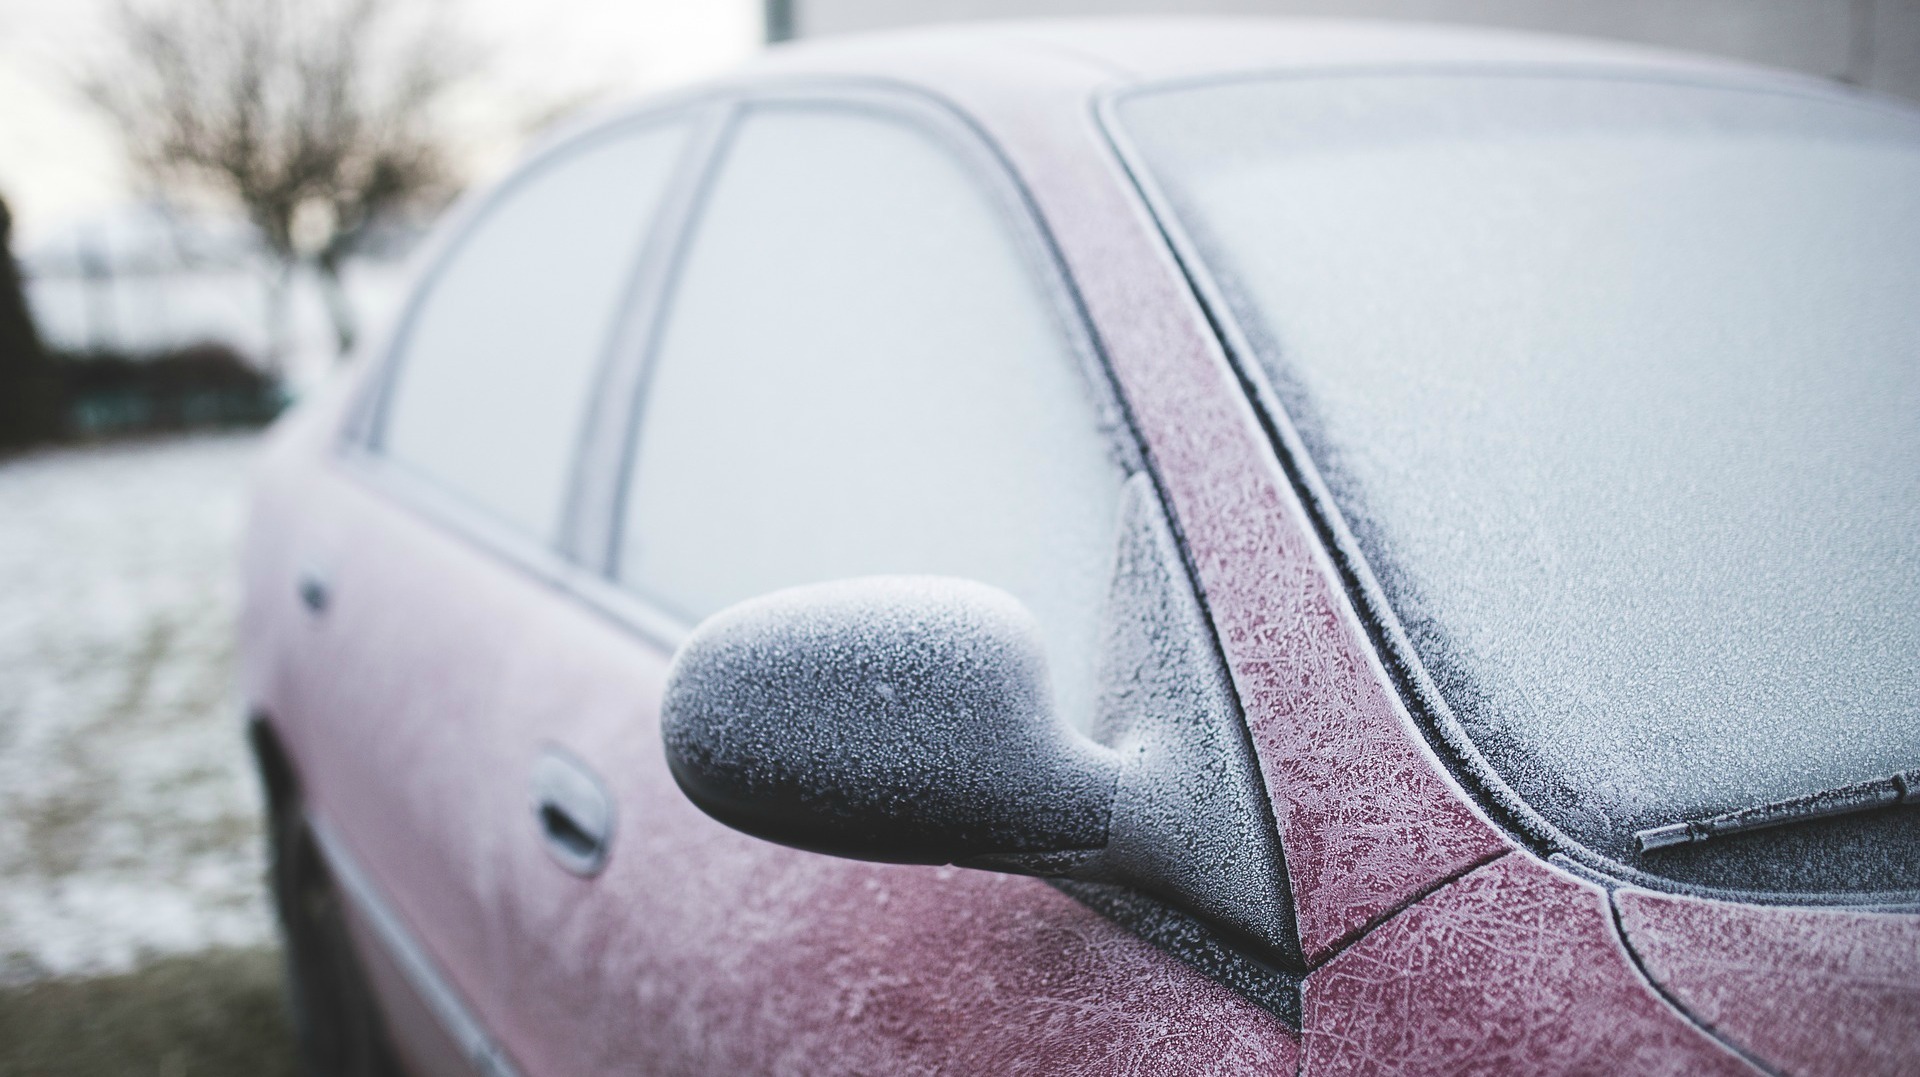 How to Defrost Car Windows